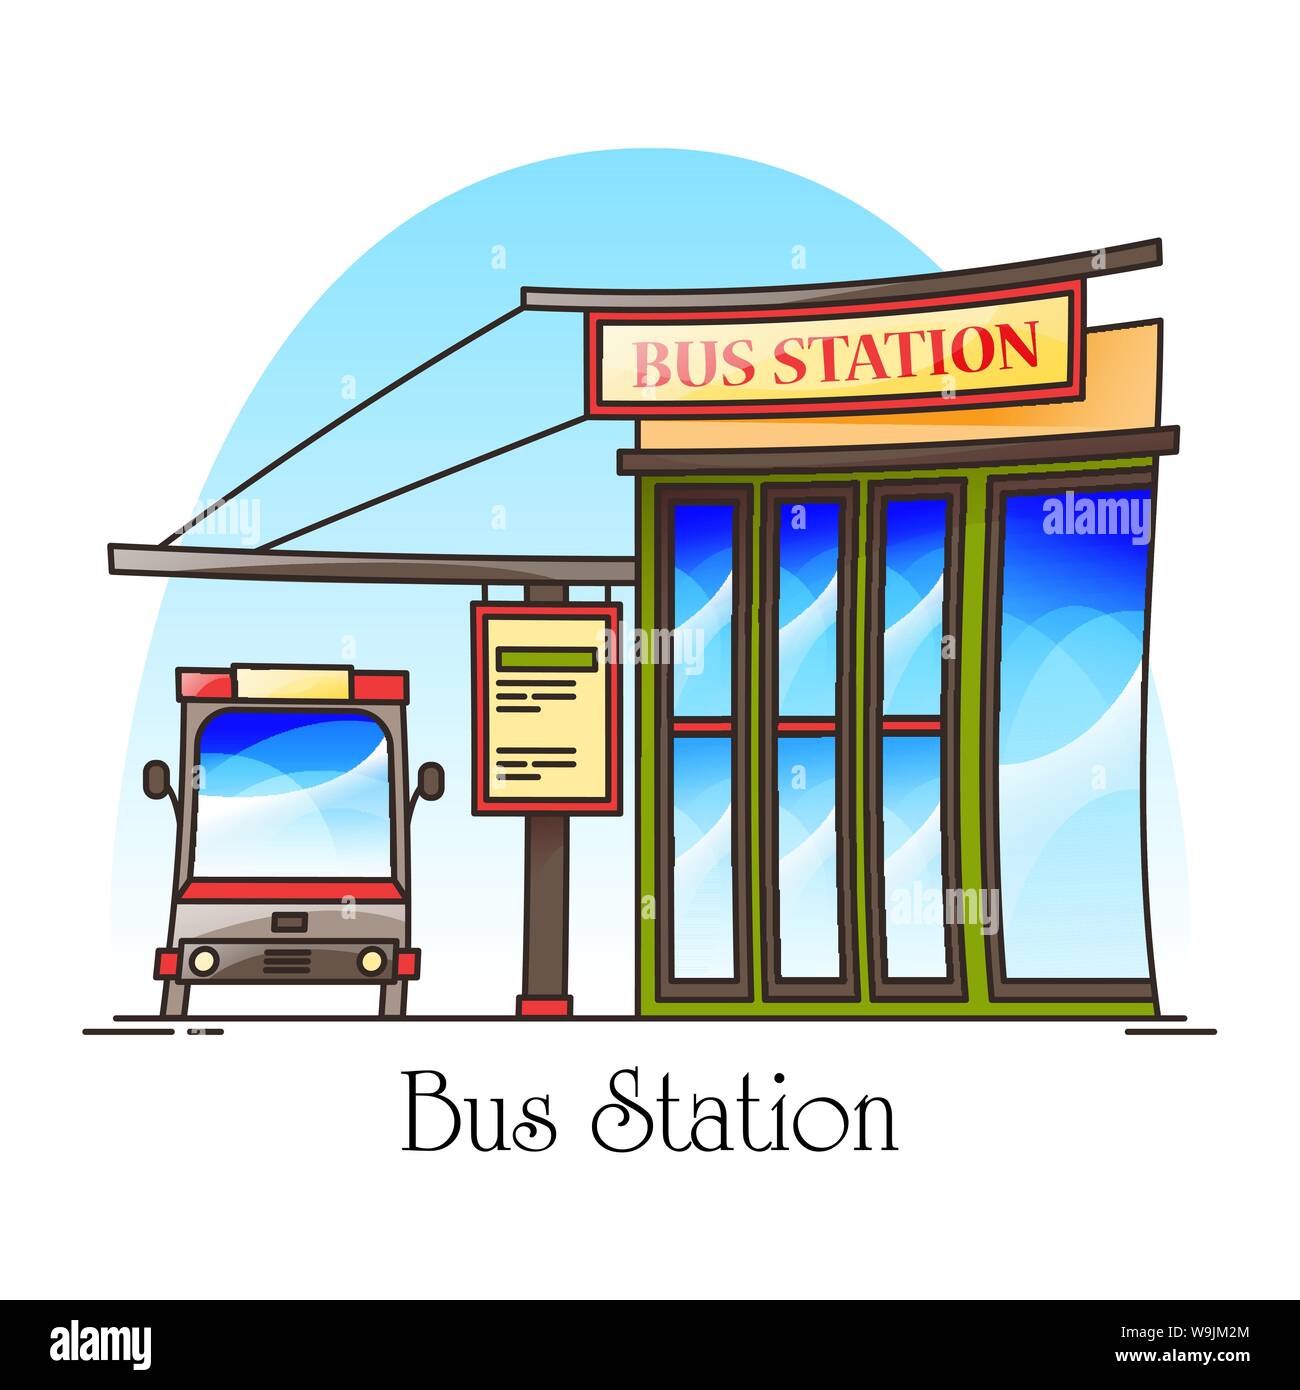 Bus station or building depot for intercity travel Stock Vector